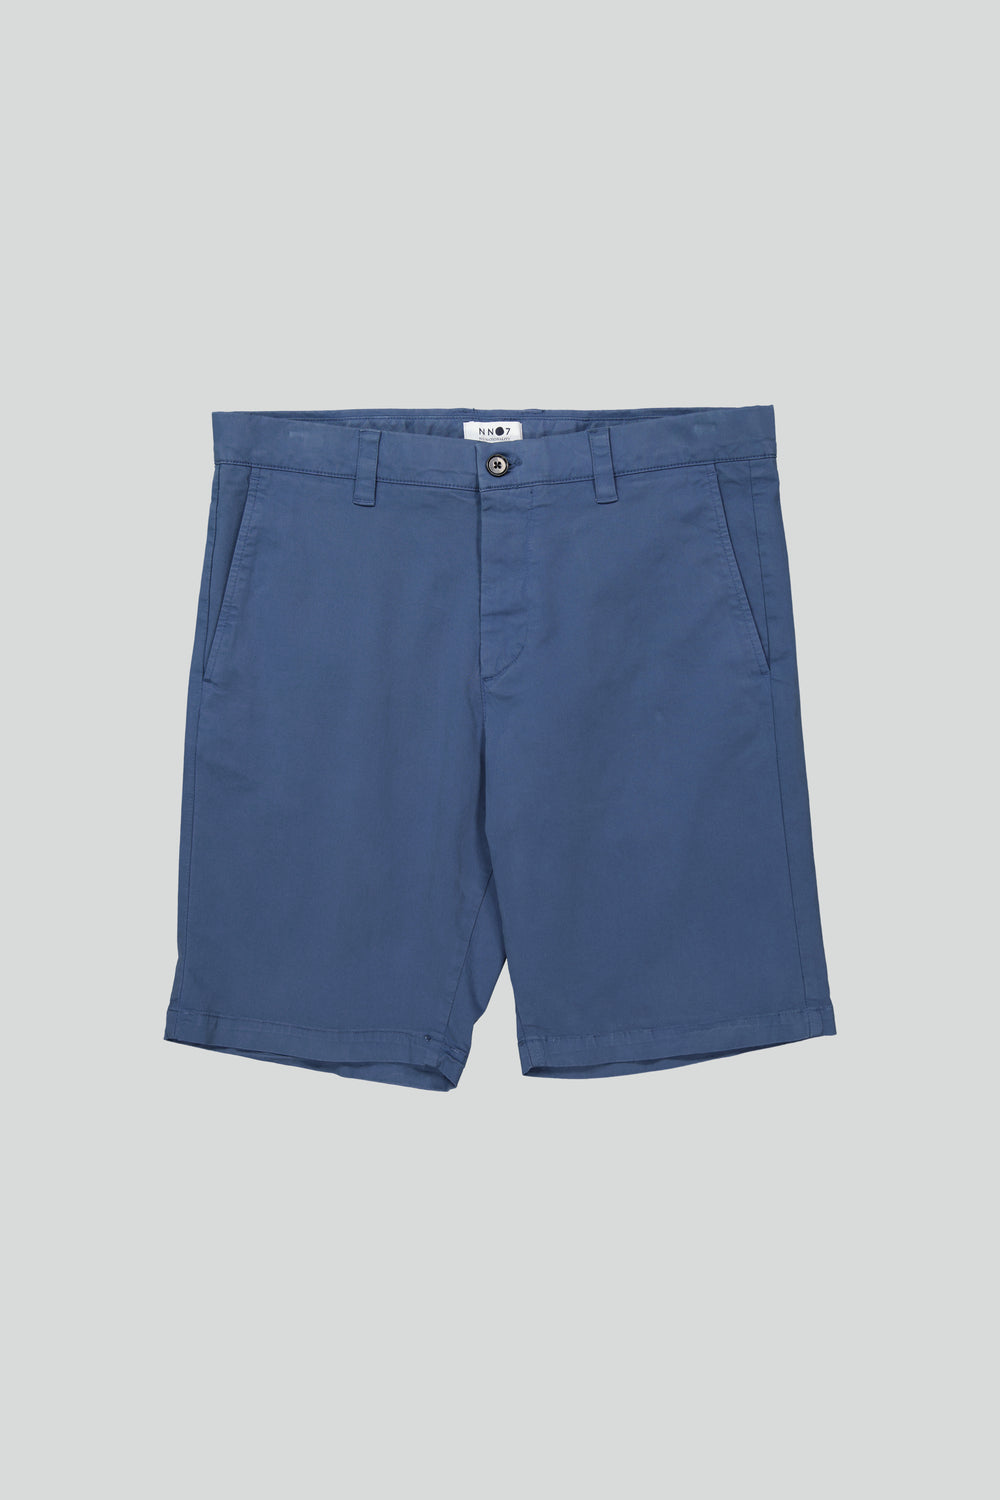 NN07 - Crown Shorts 1005 in Sargasso Sea | Buster McGee